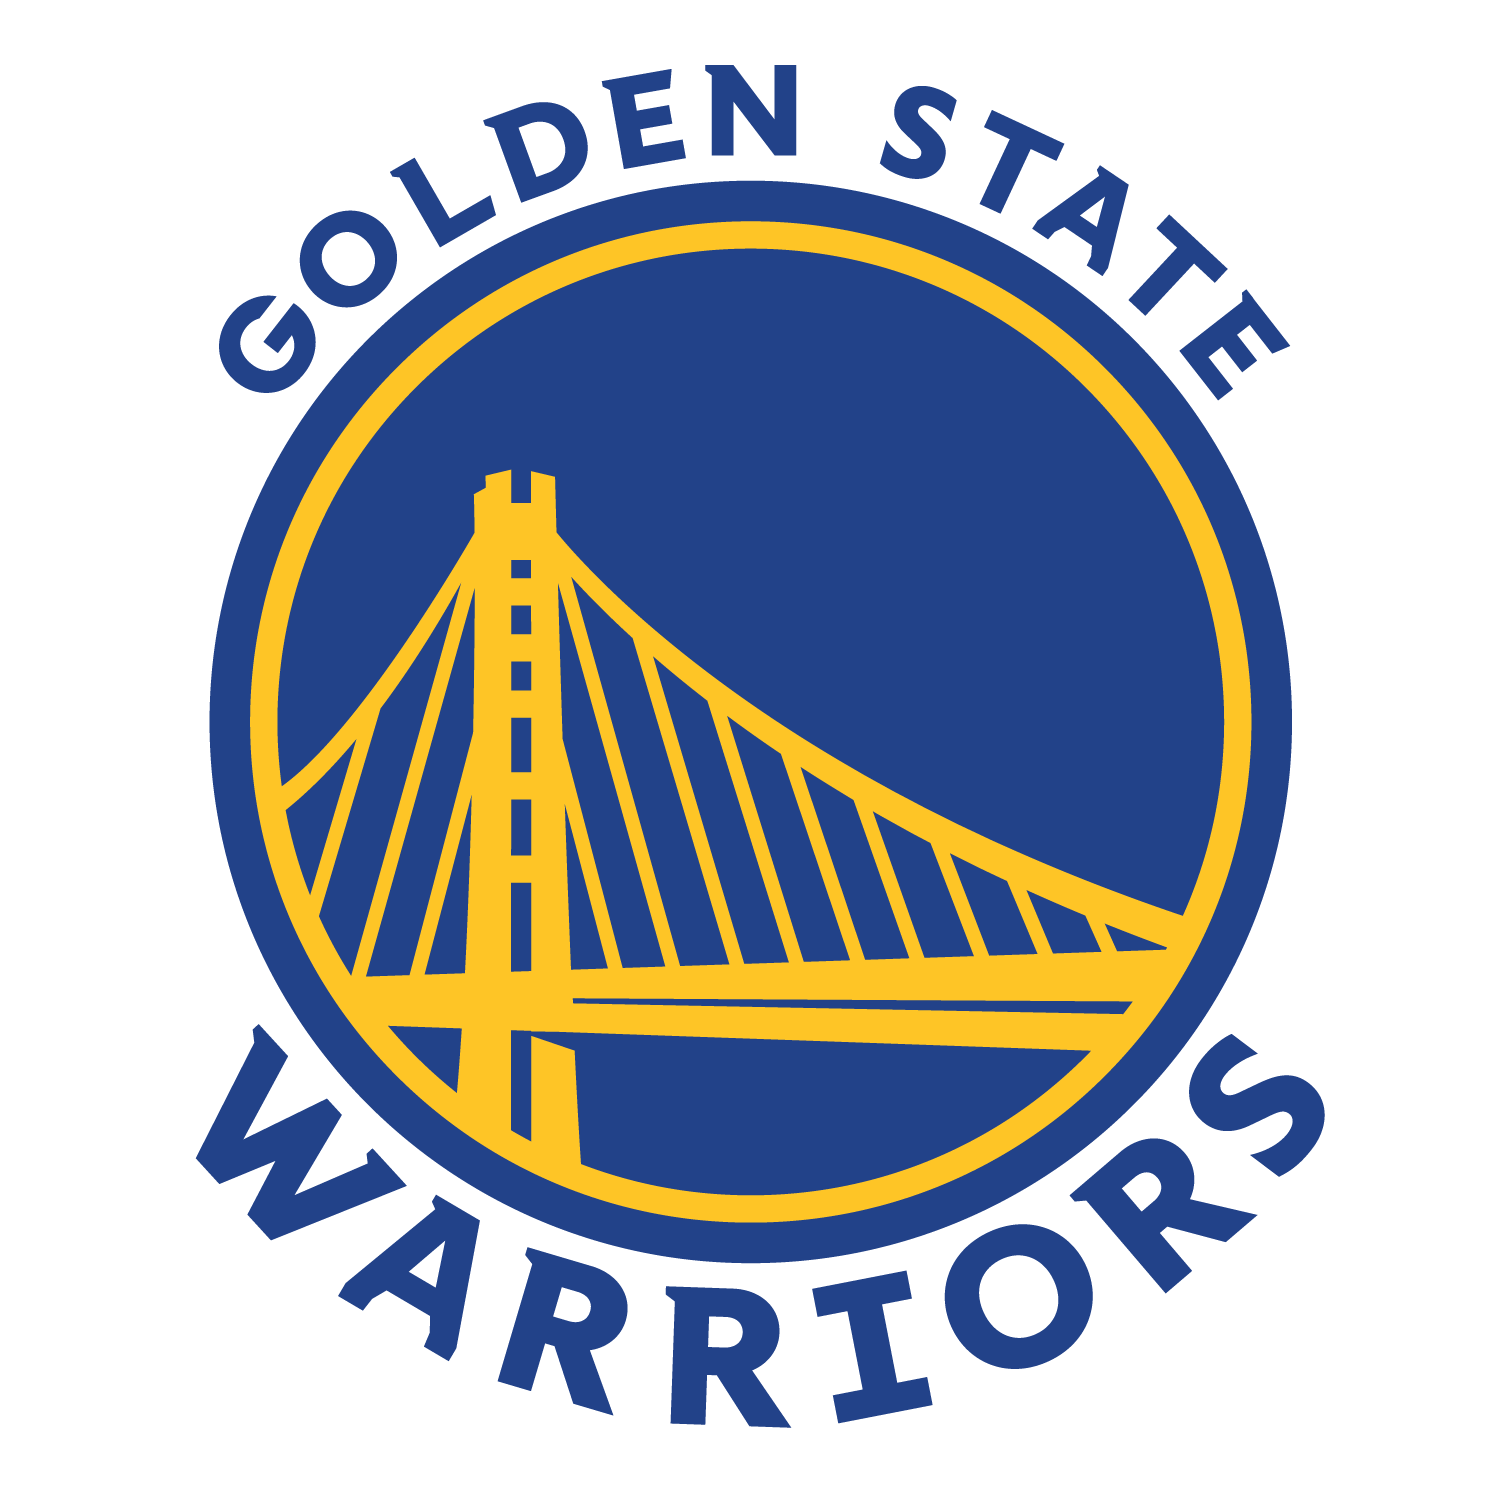 Shop Golden State Warriors products